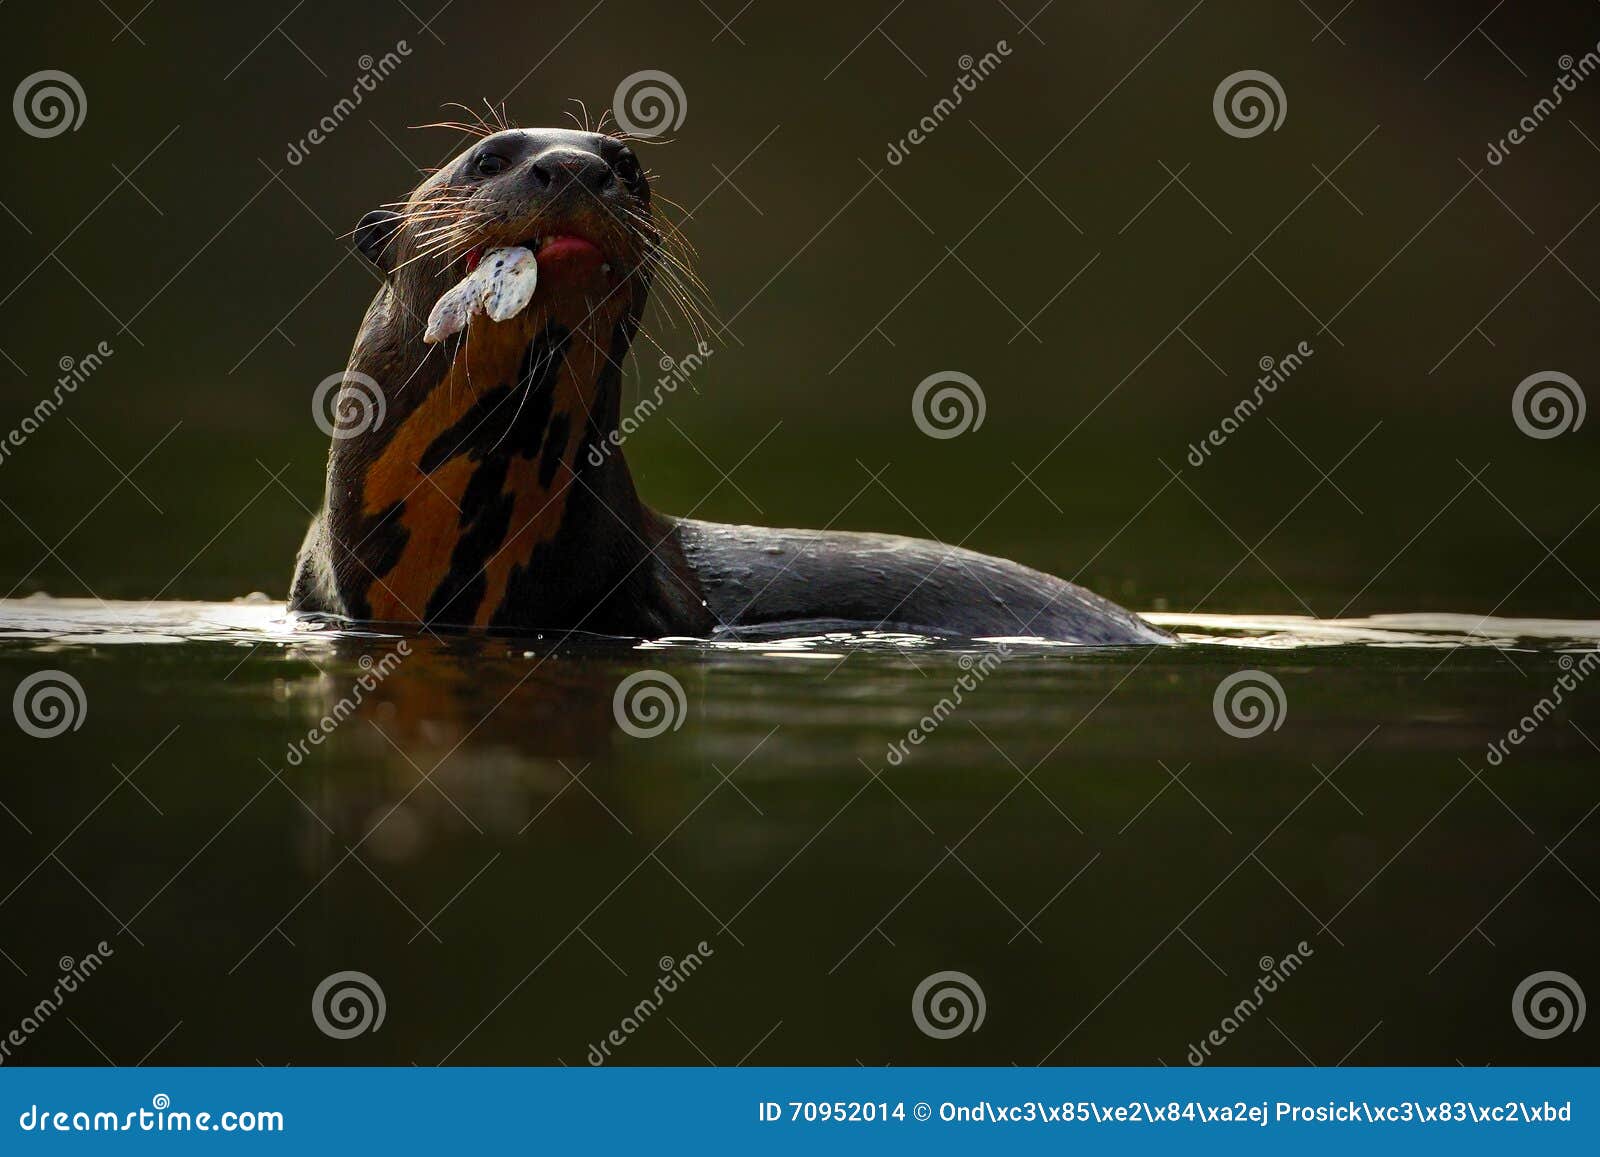 giant otter, pteronura brasiliensis, portrait in the river water with fish in mouth, animal in the nature habitat, rio negro, pant